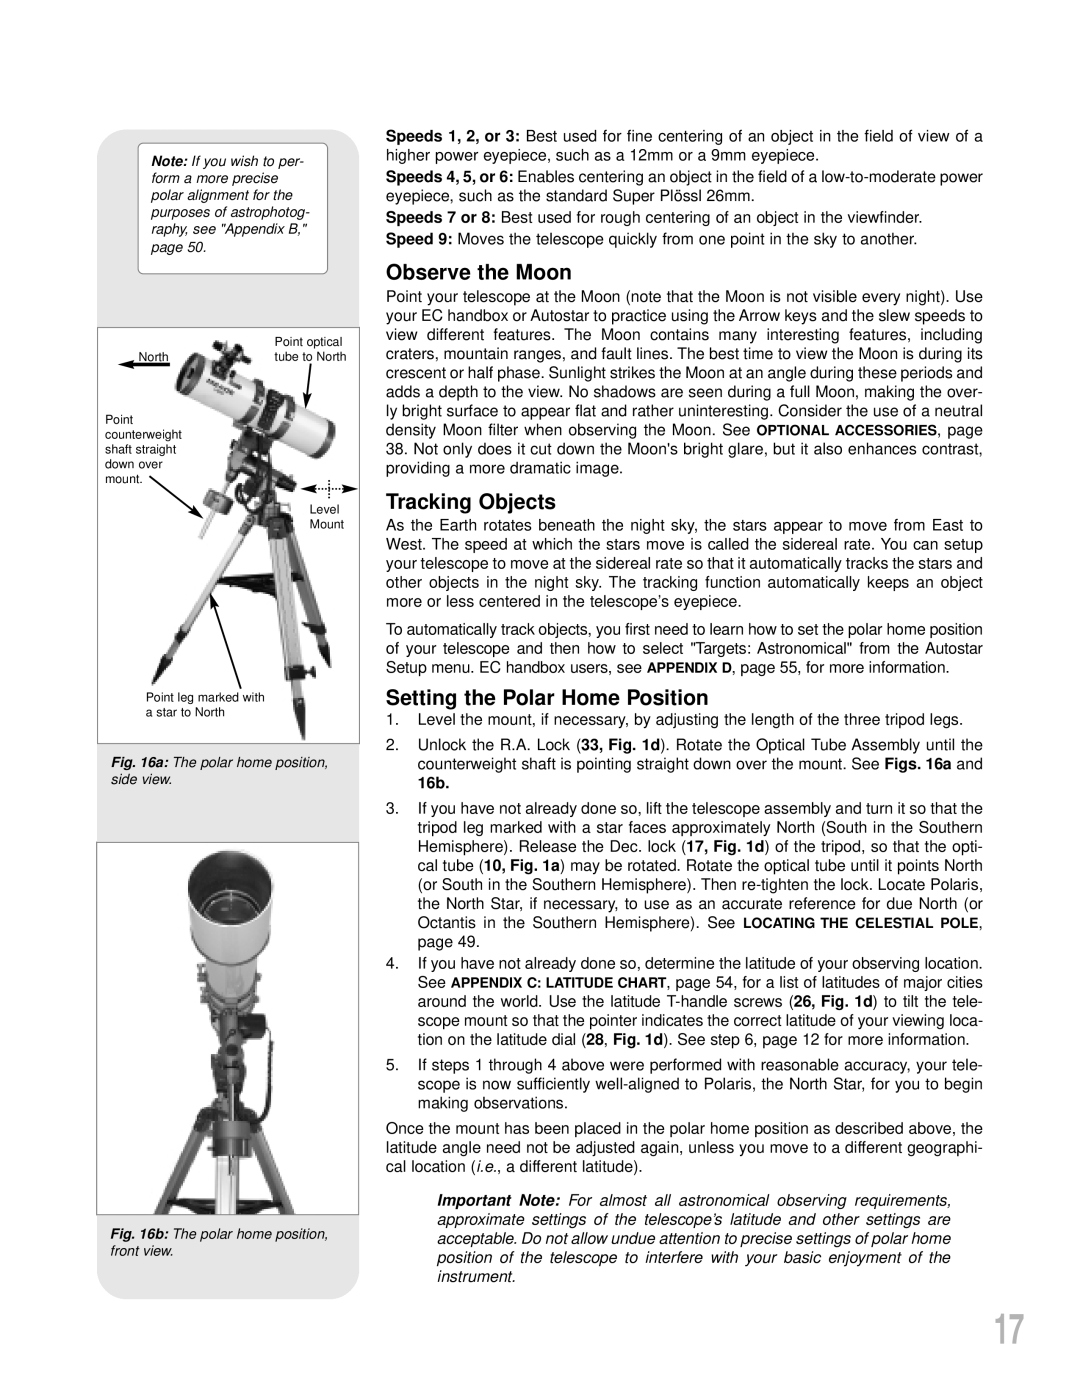 Meade LXD55 instruction manual Observe the Moon, Tracking Objects, Setting the Polar Home Position 